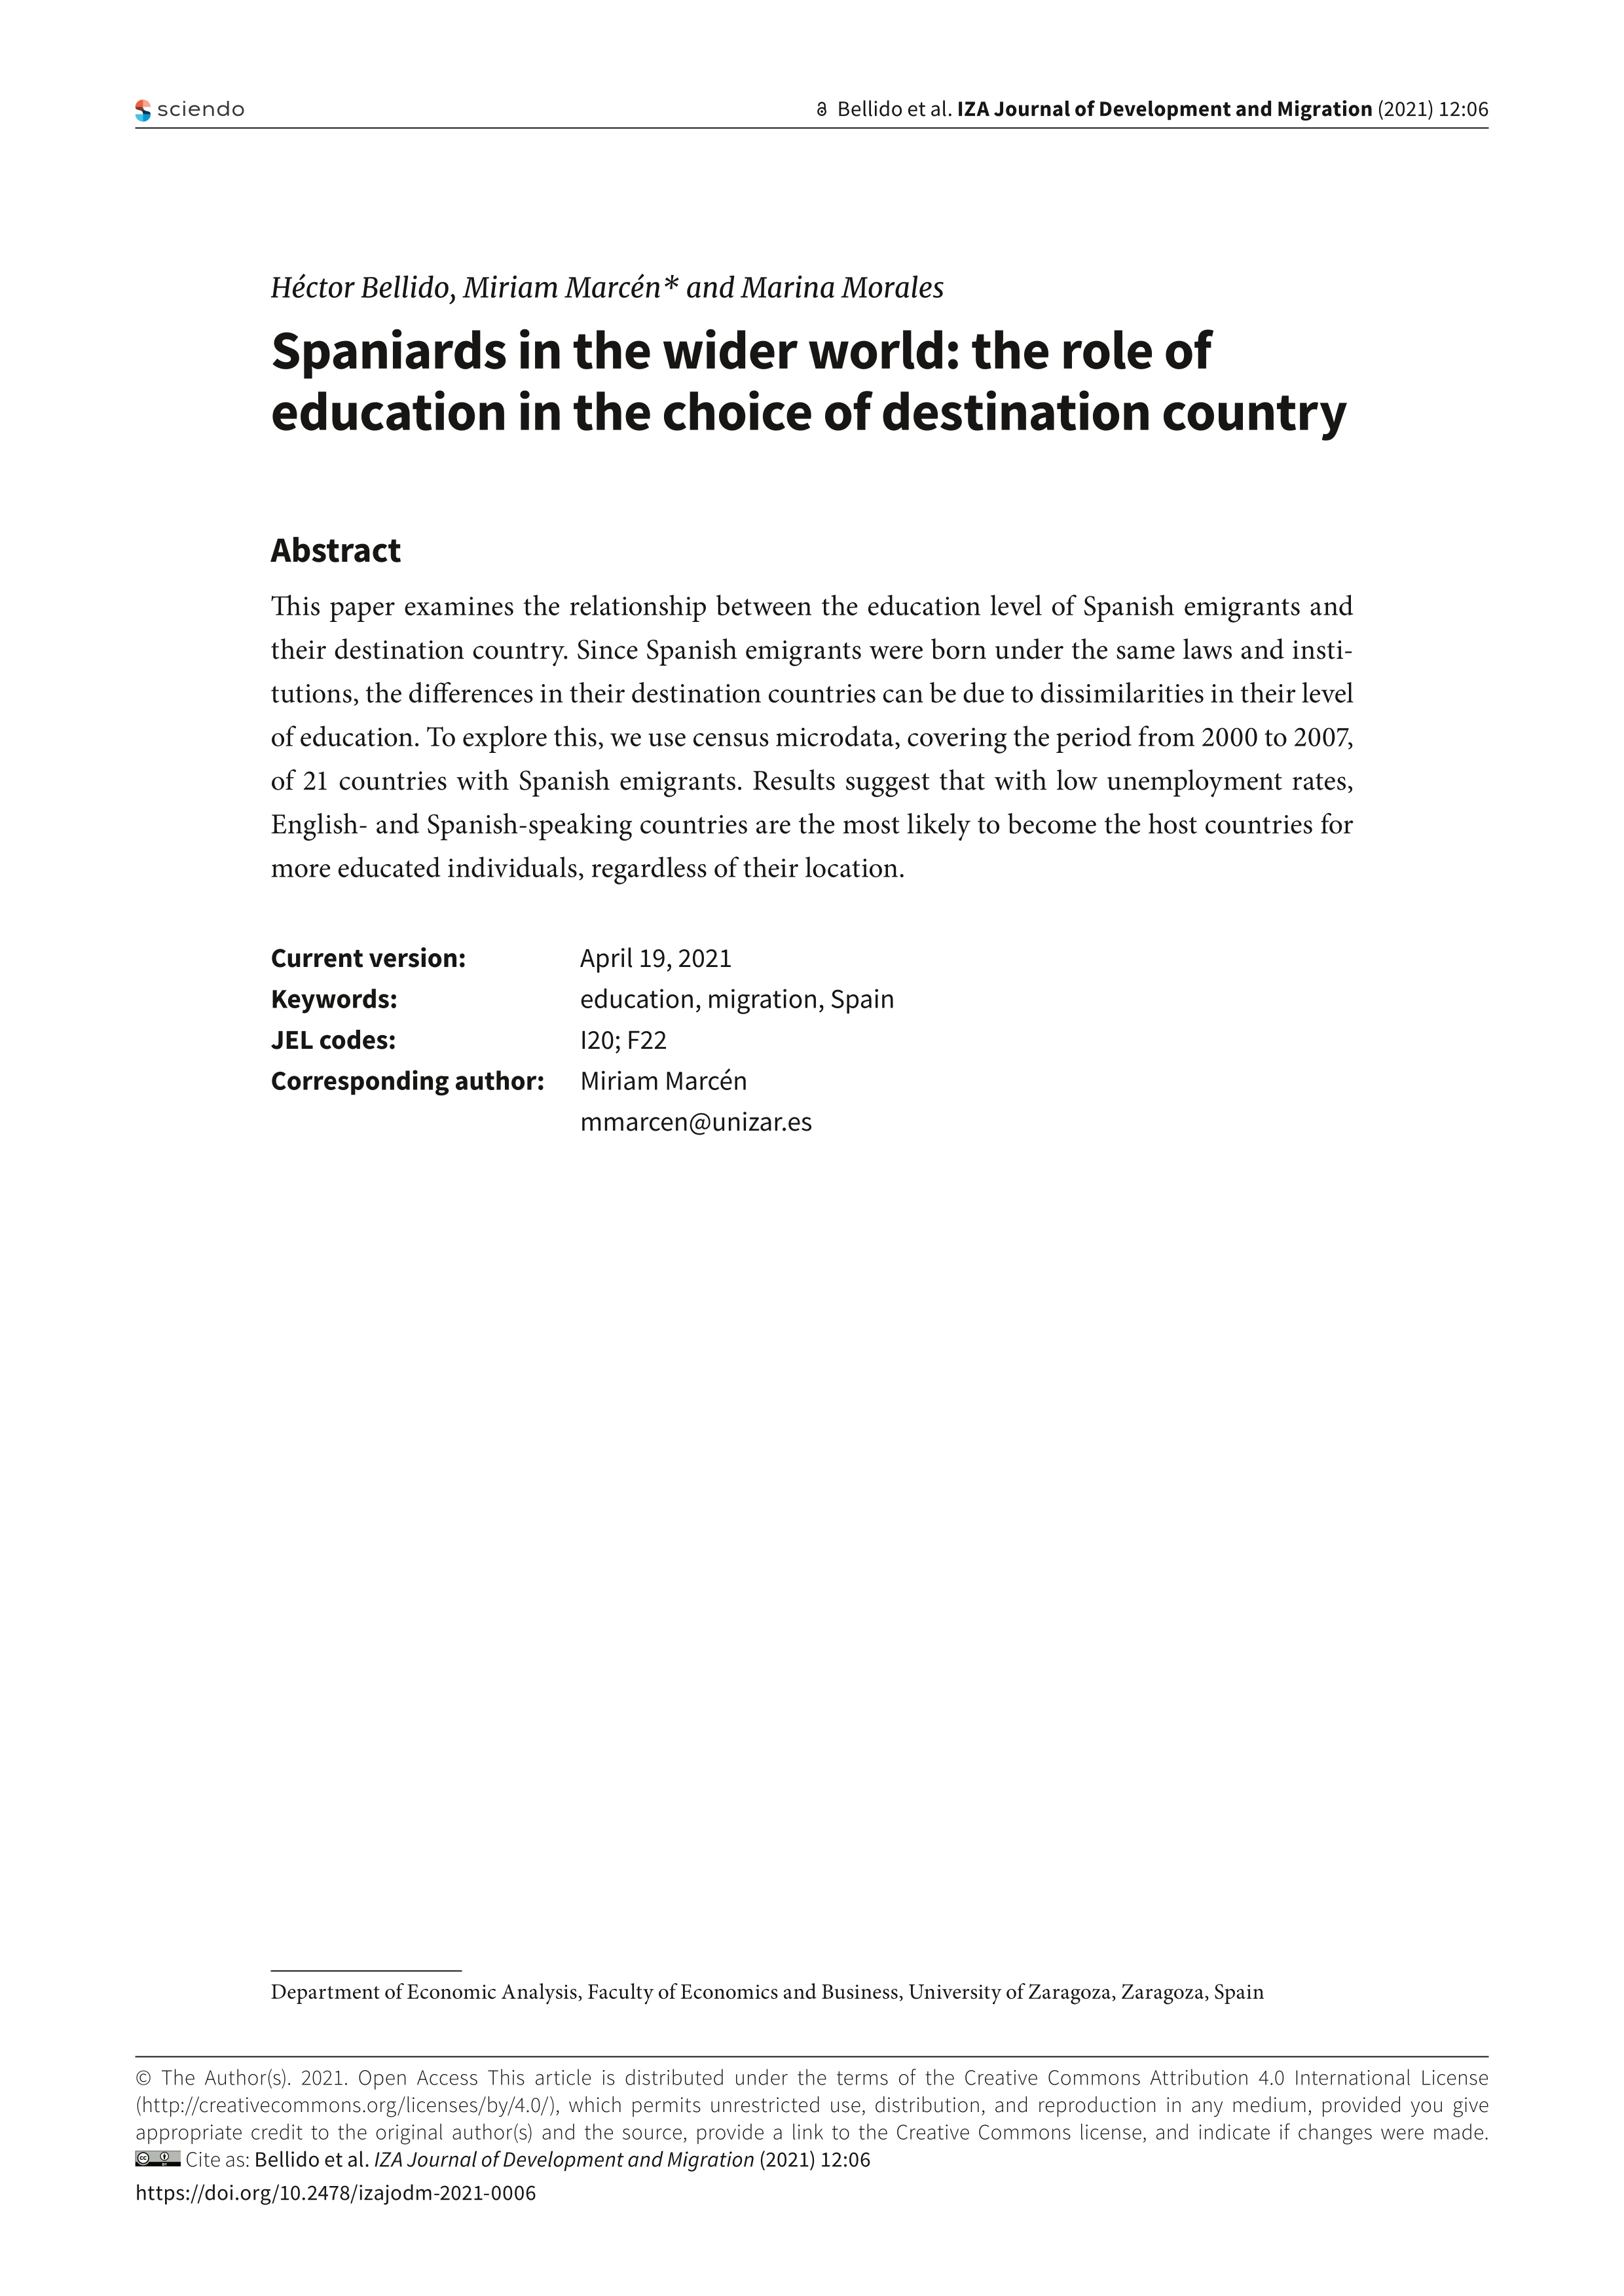 Spaniards in the wider world: the role of education in the choice of destination country